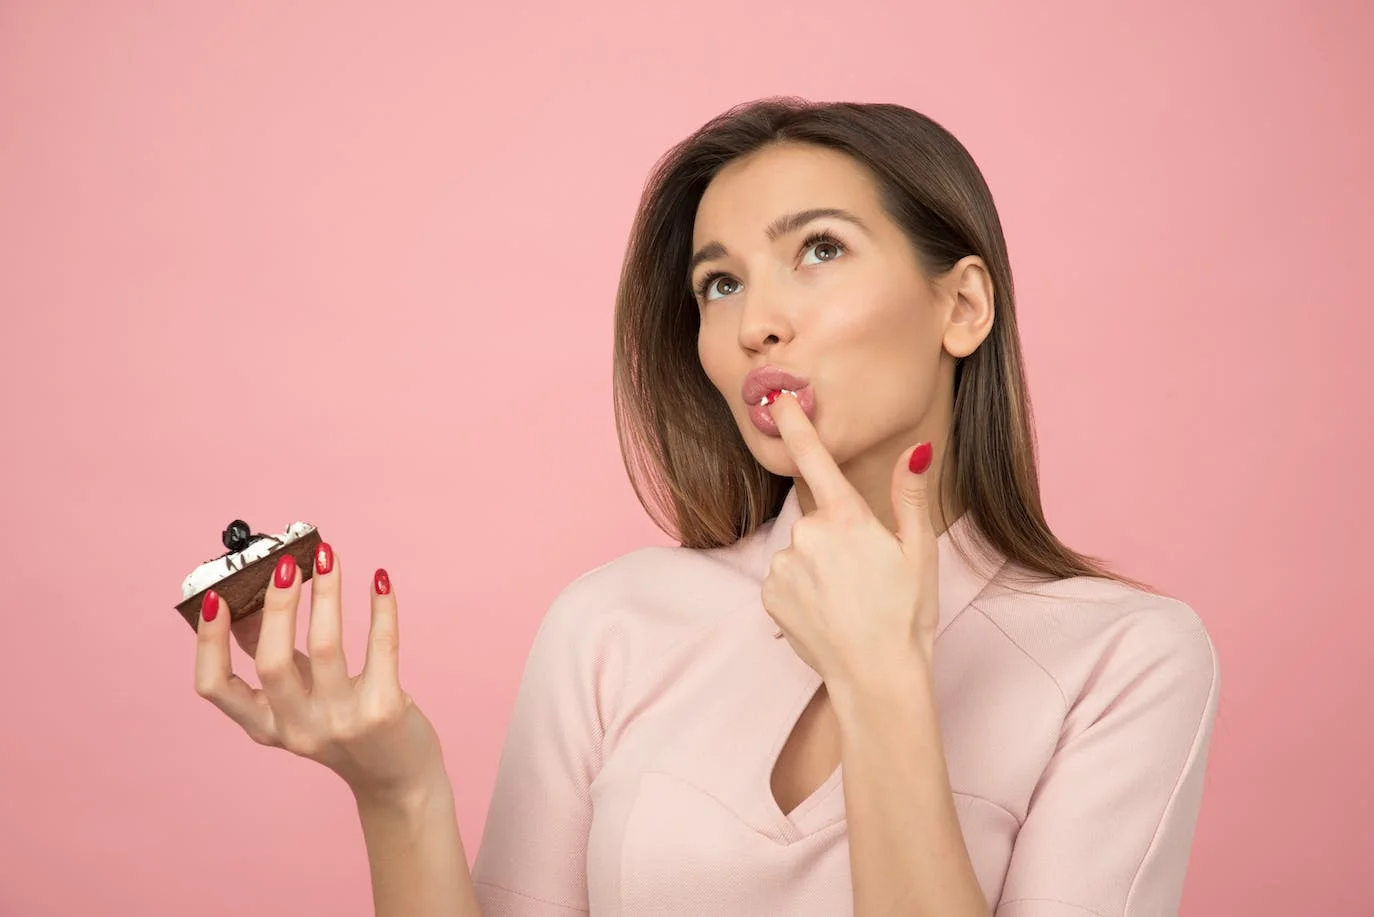 Woman photo : photography of a brown-eyed Asian woman, wearing red nail polish on both hands, holding a cupcake in her right hand and tasting the cream of the cake on one fingertip of her left hand. Plain pink background.